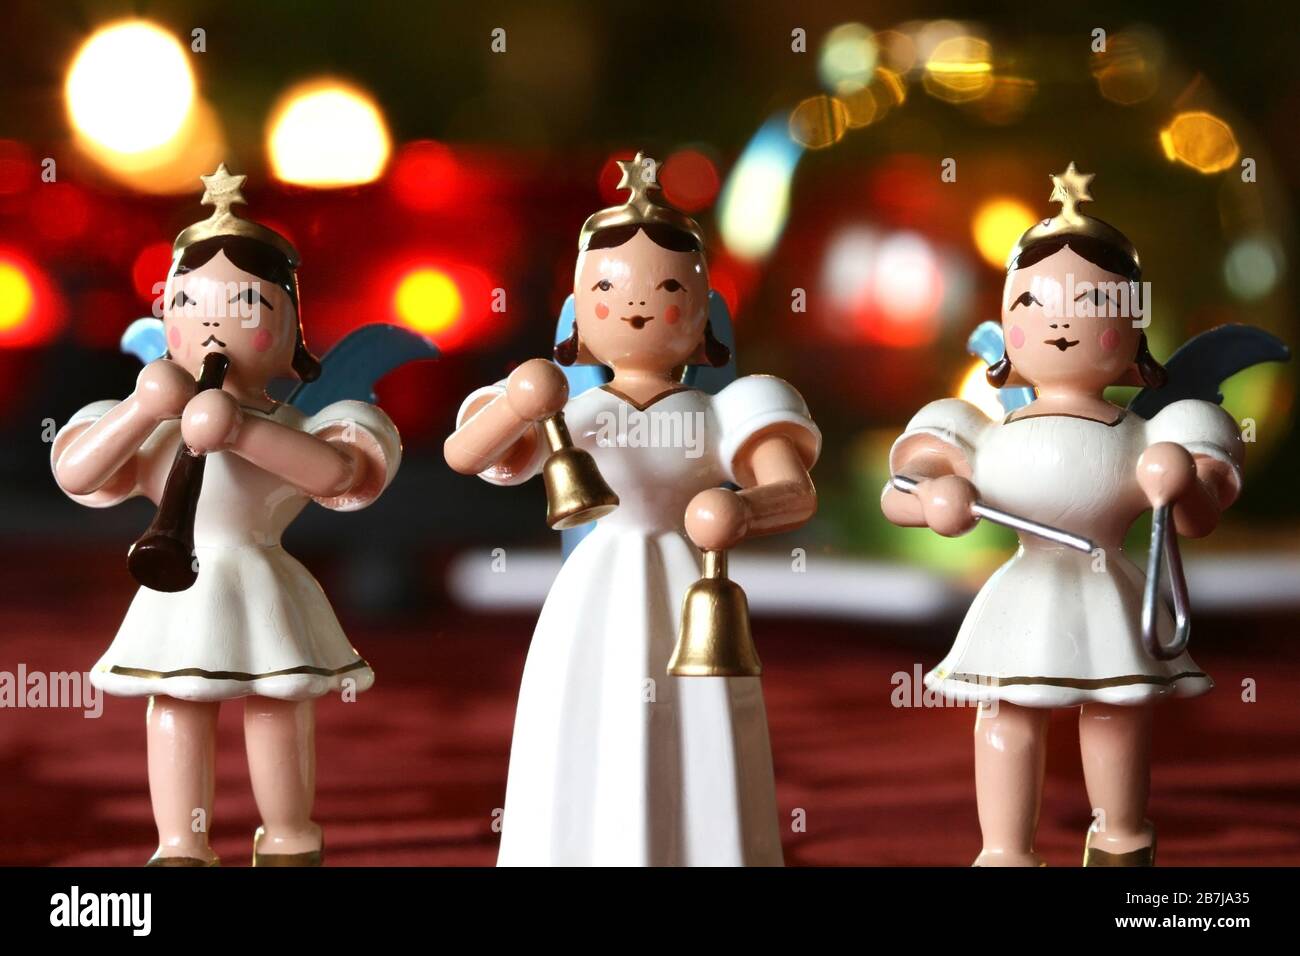 Christmas Concert: three decoration angels making music in front of Christmassy lights Stock Photo